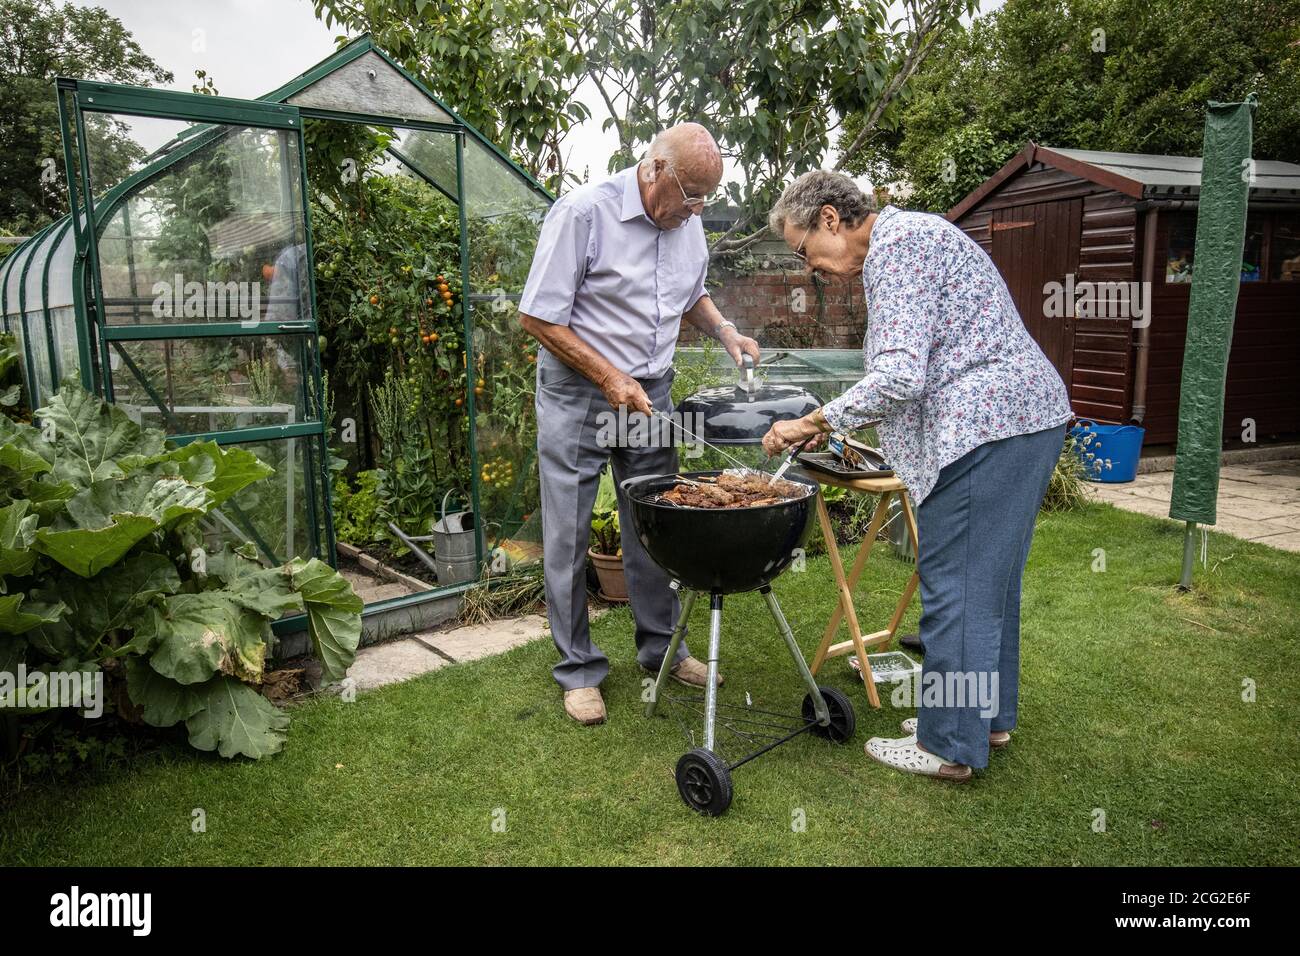 Retired couple in their 80's enjoying life outdoors barbecuing and eating healthy home grown vegetables during the coronavirus lockdown, Somerset, UK Stock Photo